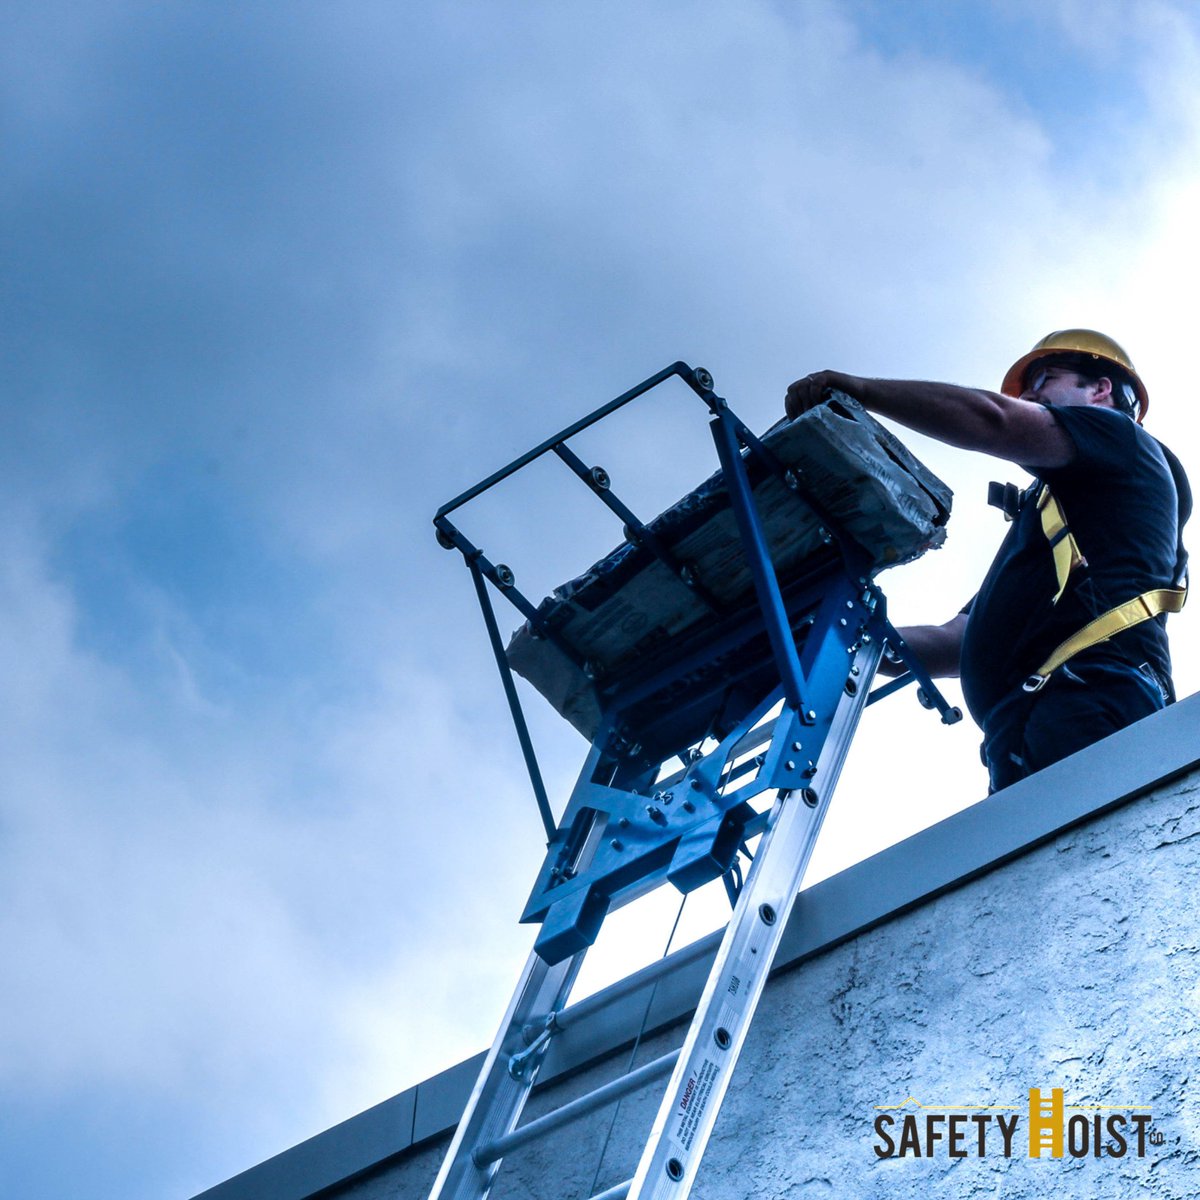 Safety Hoist™ is a roofers best friend -- get a quote today by calling 877-99-HOIST 📞 or request a quote online at safetyhoistcompany.com/request-a-quot…

#SafetyHoist #LadderLift #ConstructionSupply #Roofing